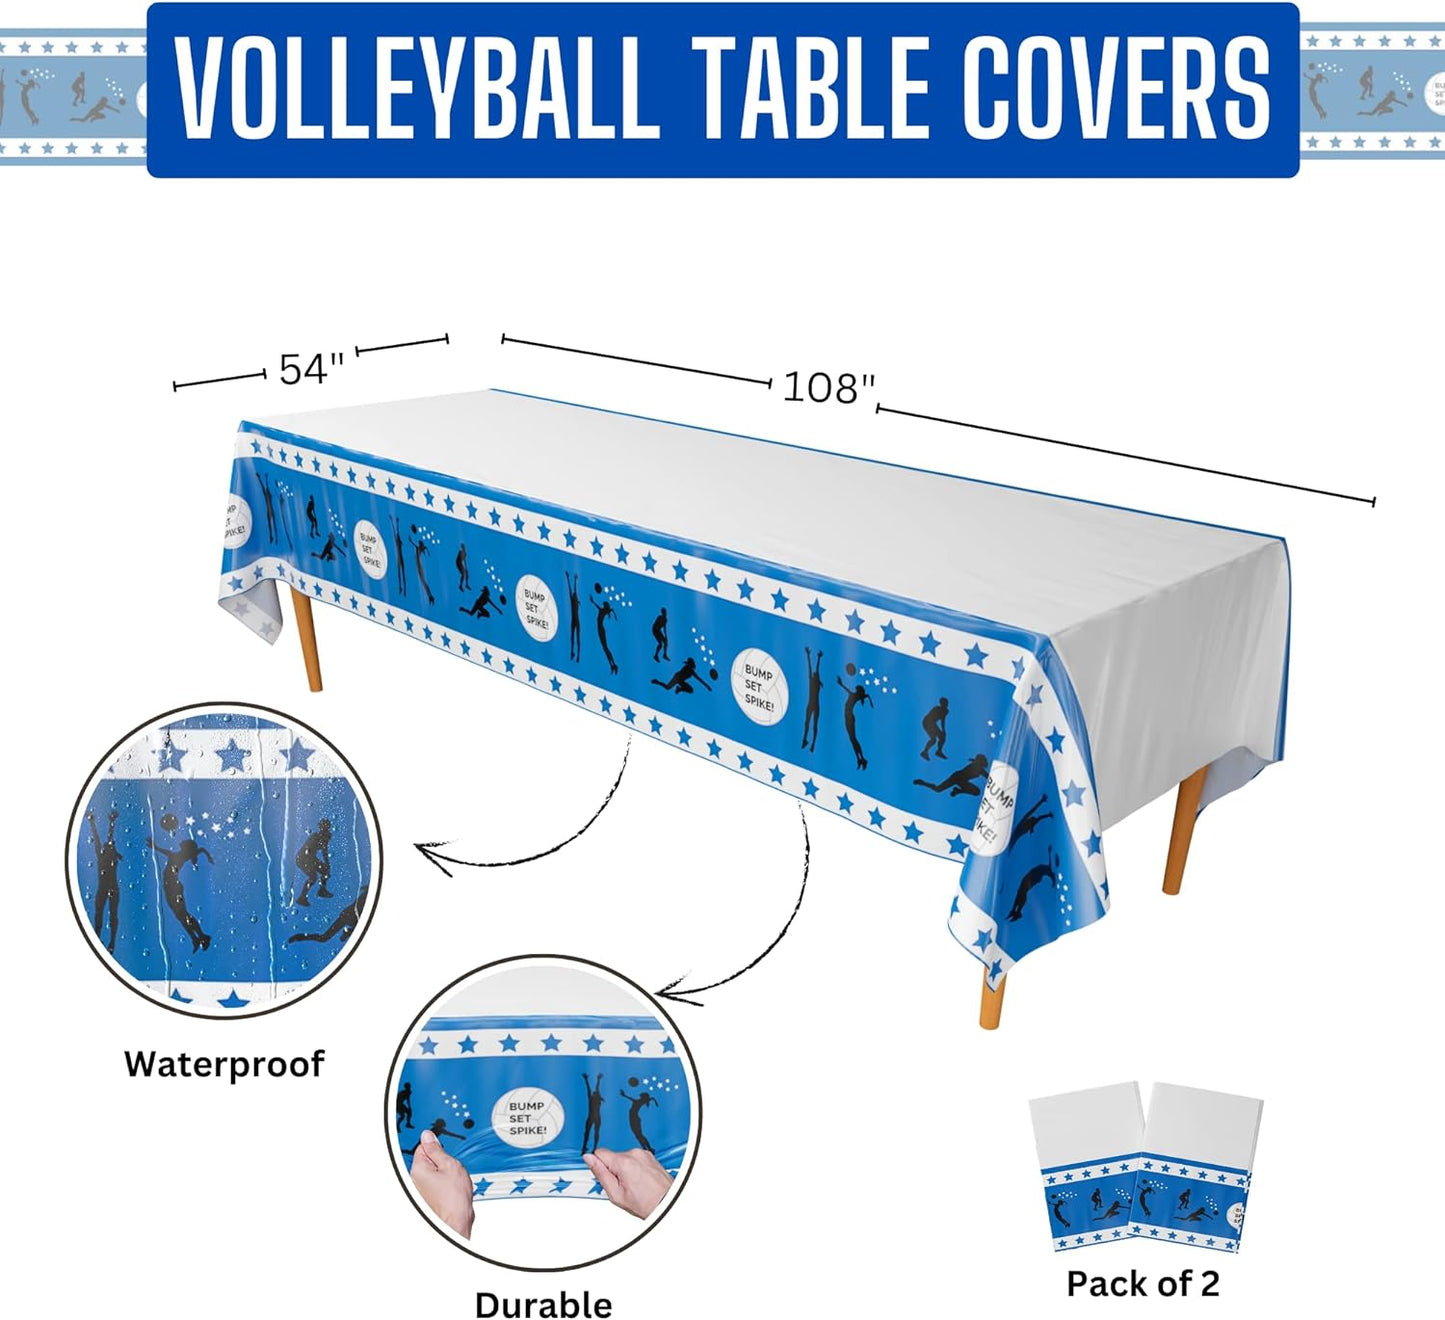 Volleyball Tablecovers - 54in x 108in (2 Pack)